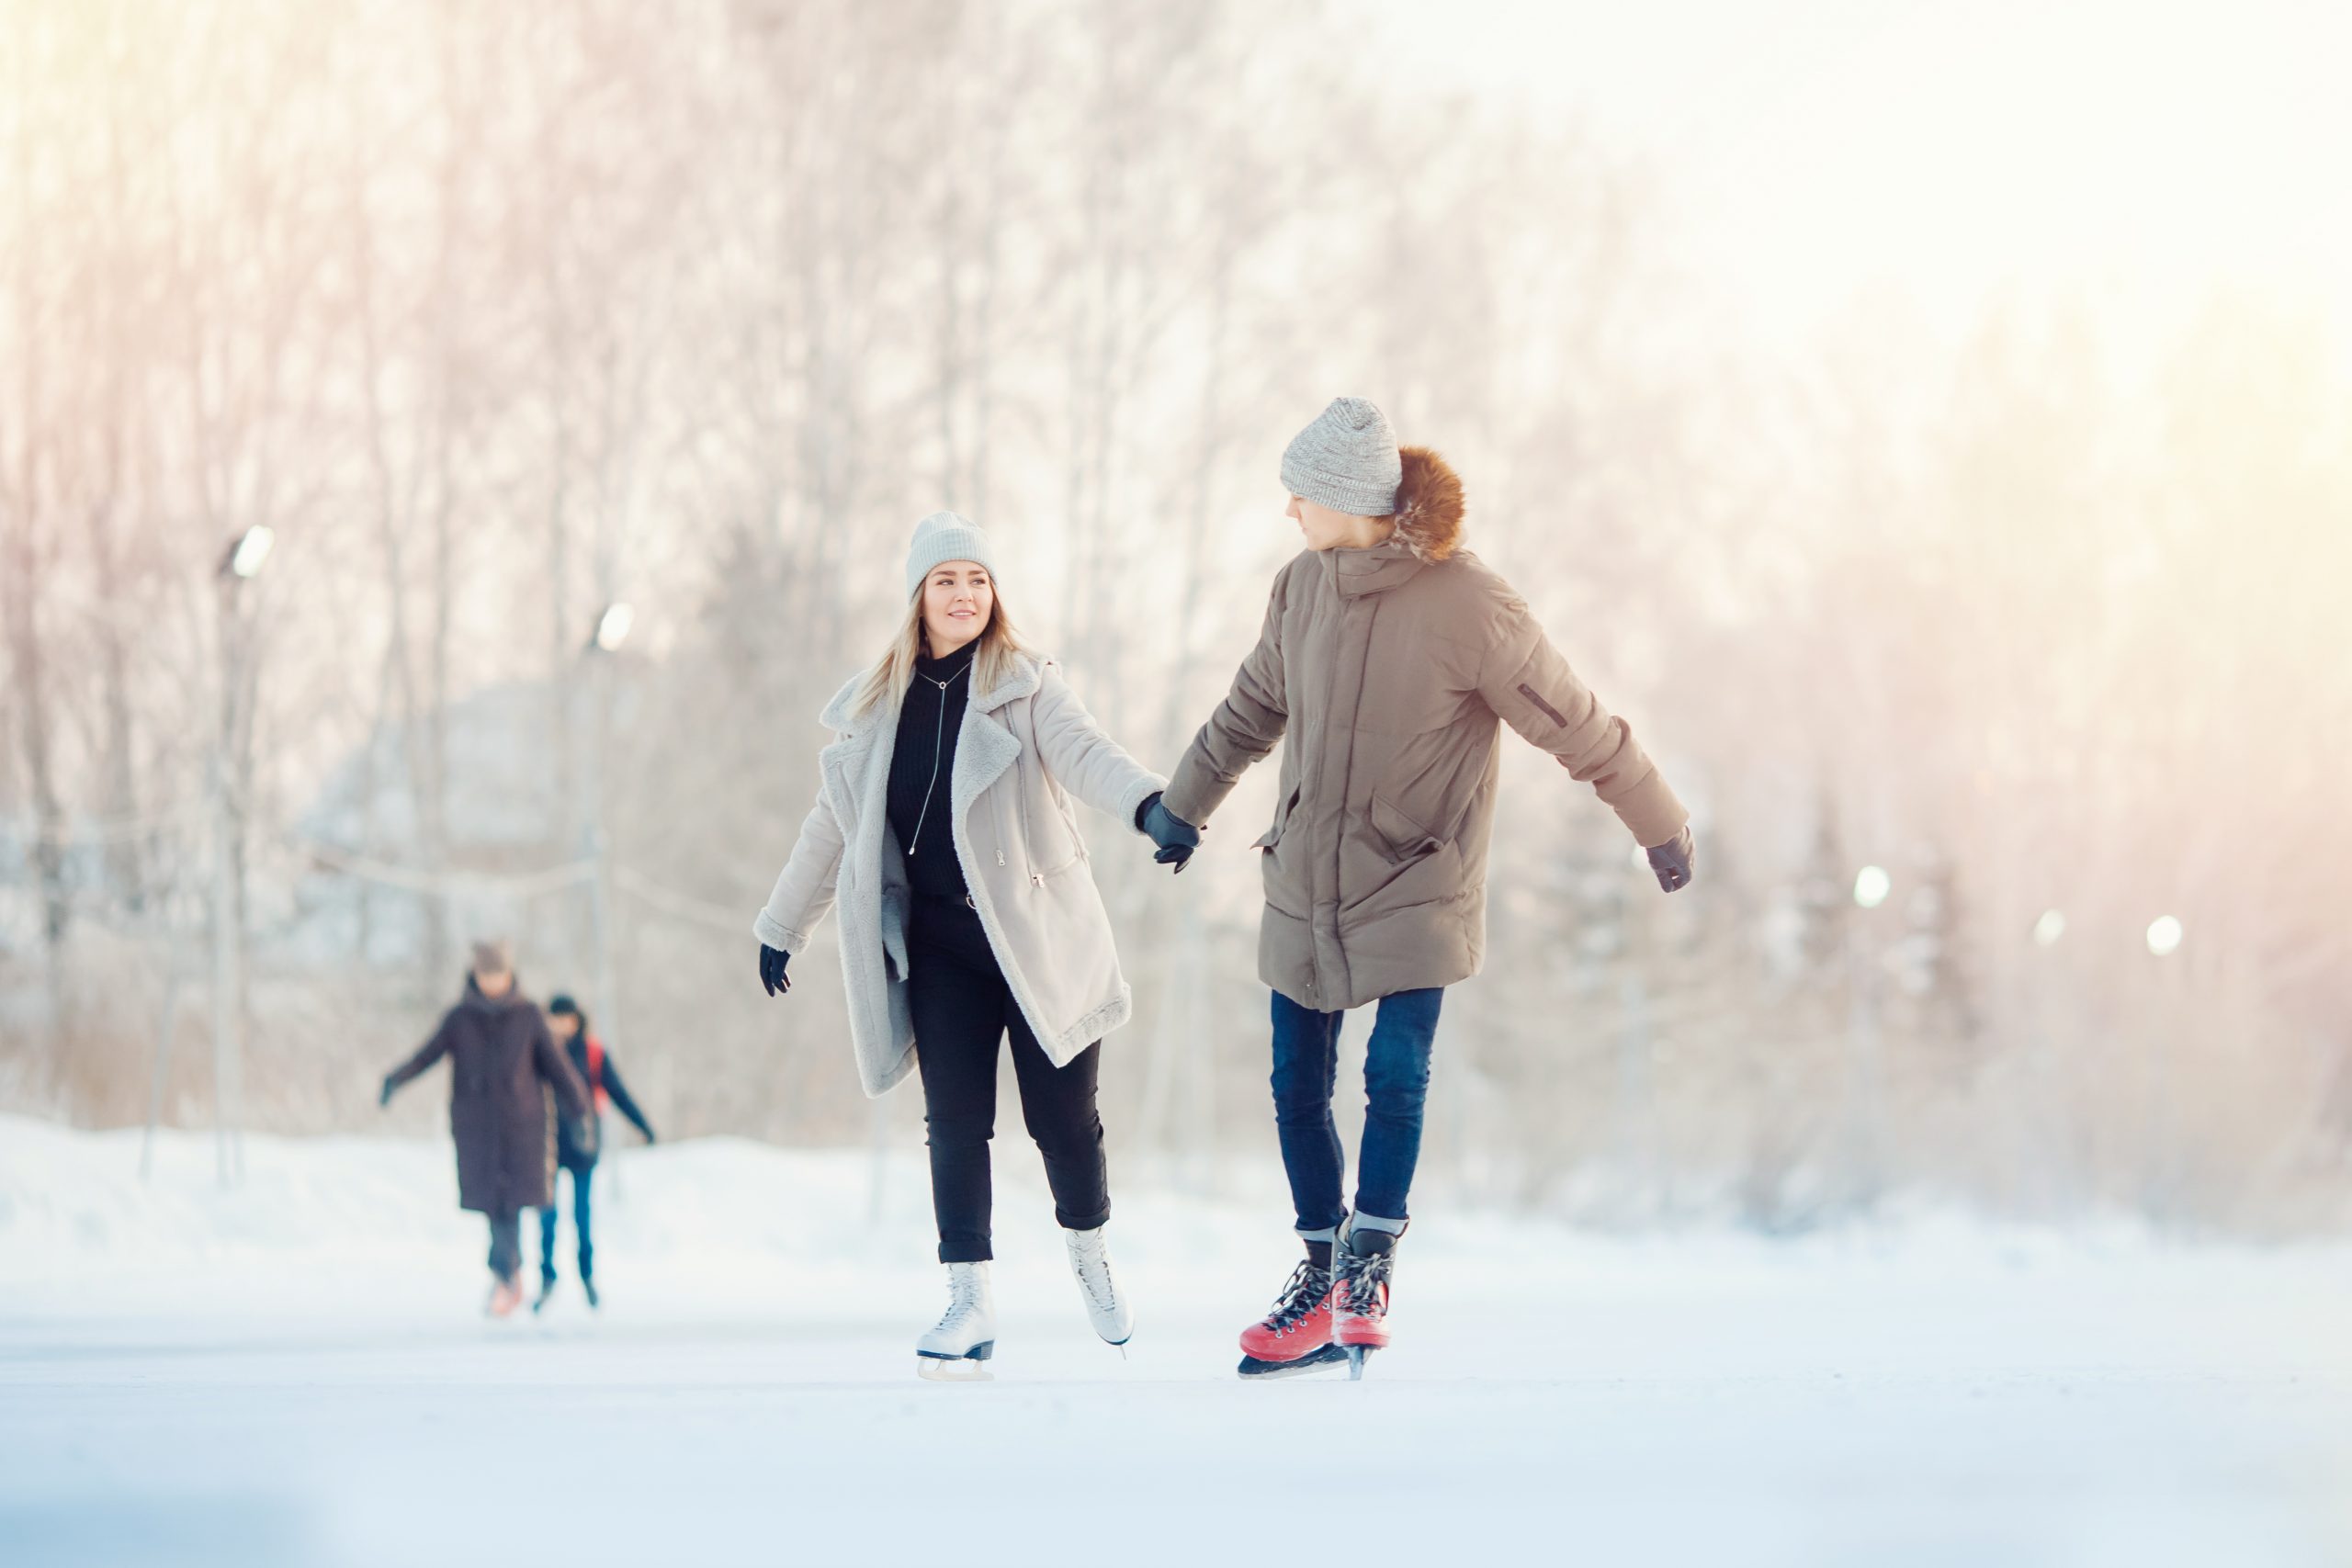 How to choose the right ice skates for you